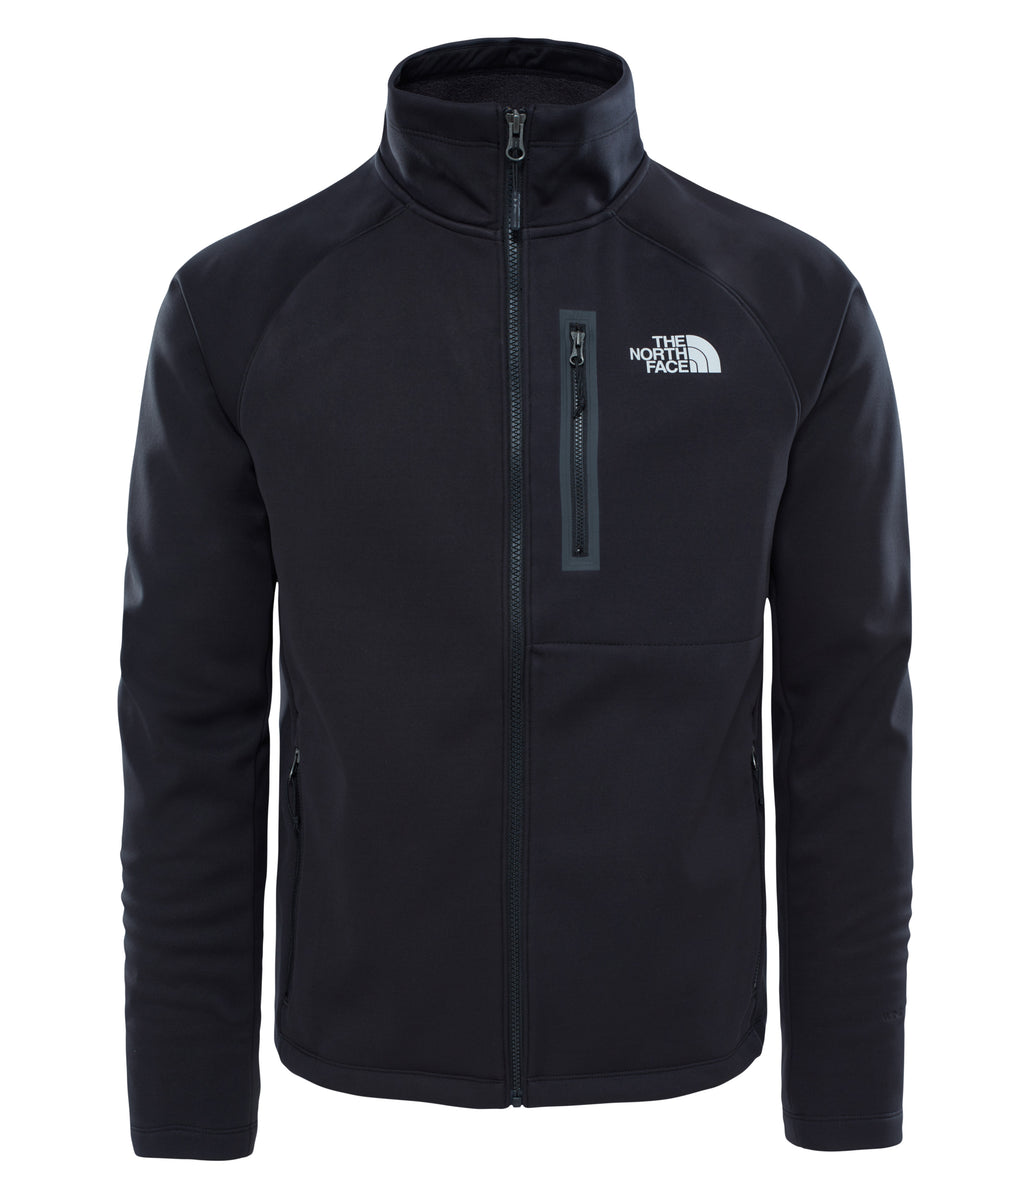 The North Face Men's Canyonlands promotional Soft Shell Jacket